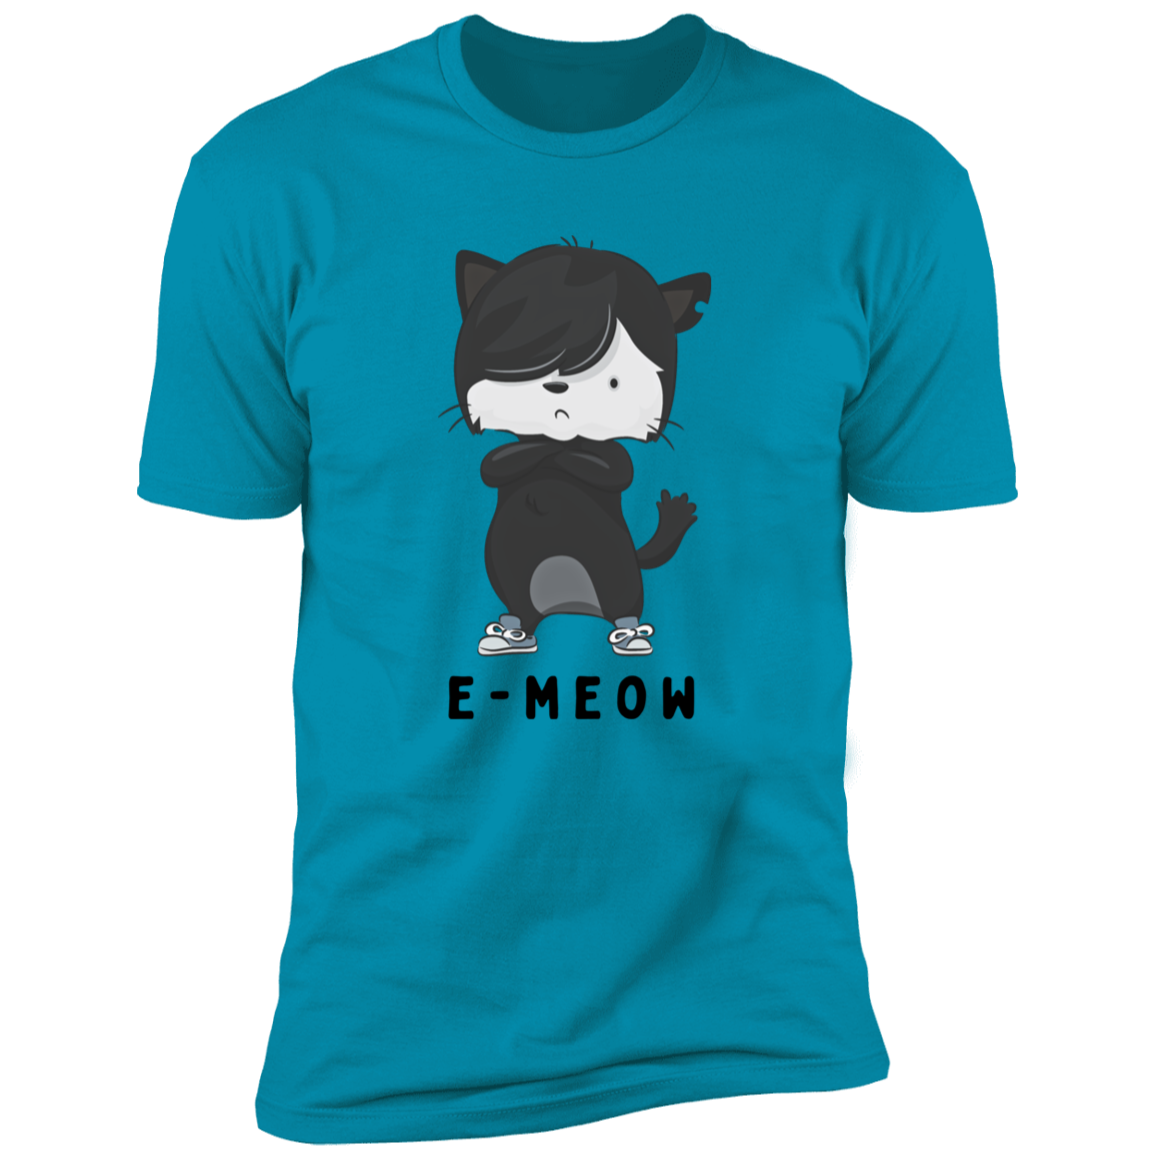 E-meow cat shirt, funny cat shirt for humans, cat mom and cat dad shirt, in turquoise